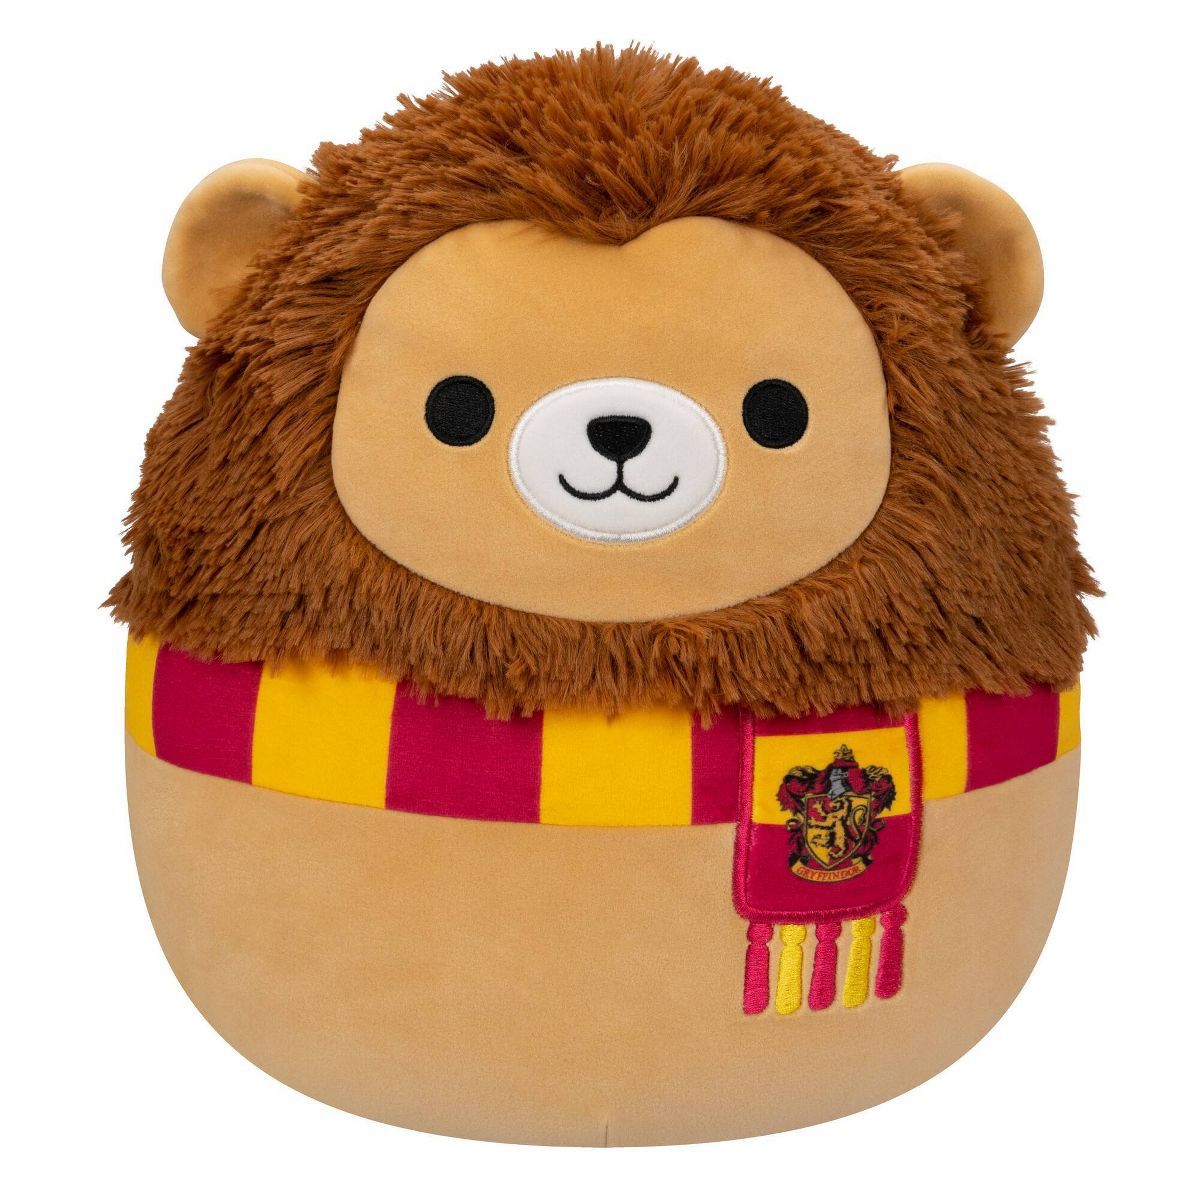 Squishmallows Harry Potter 10" Gryffindor Lion Plush Toy | Target